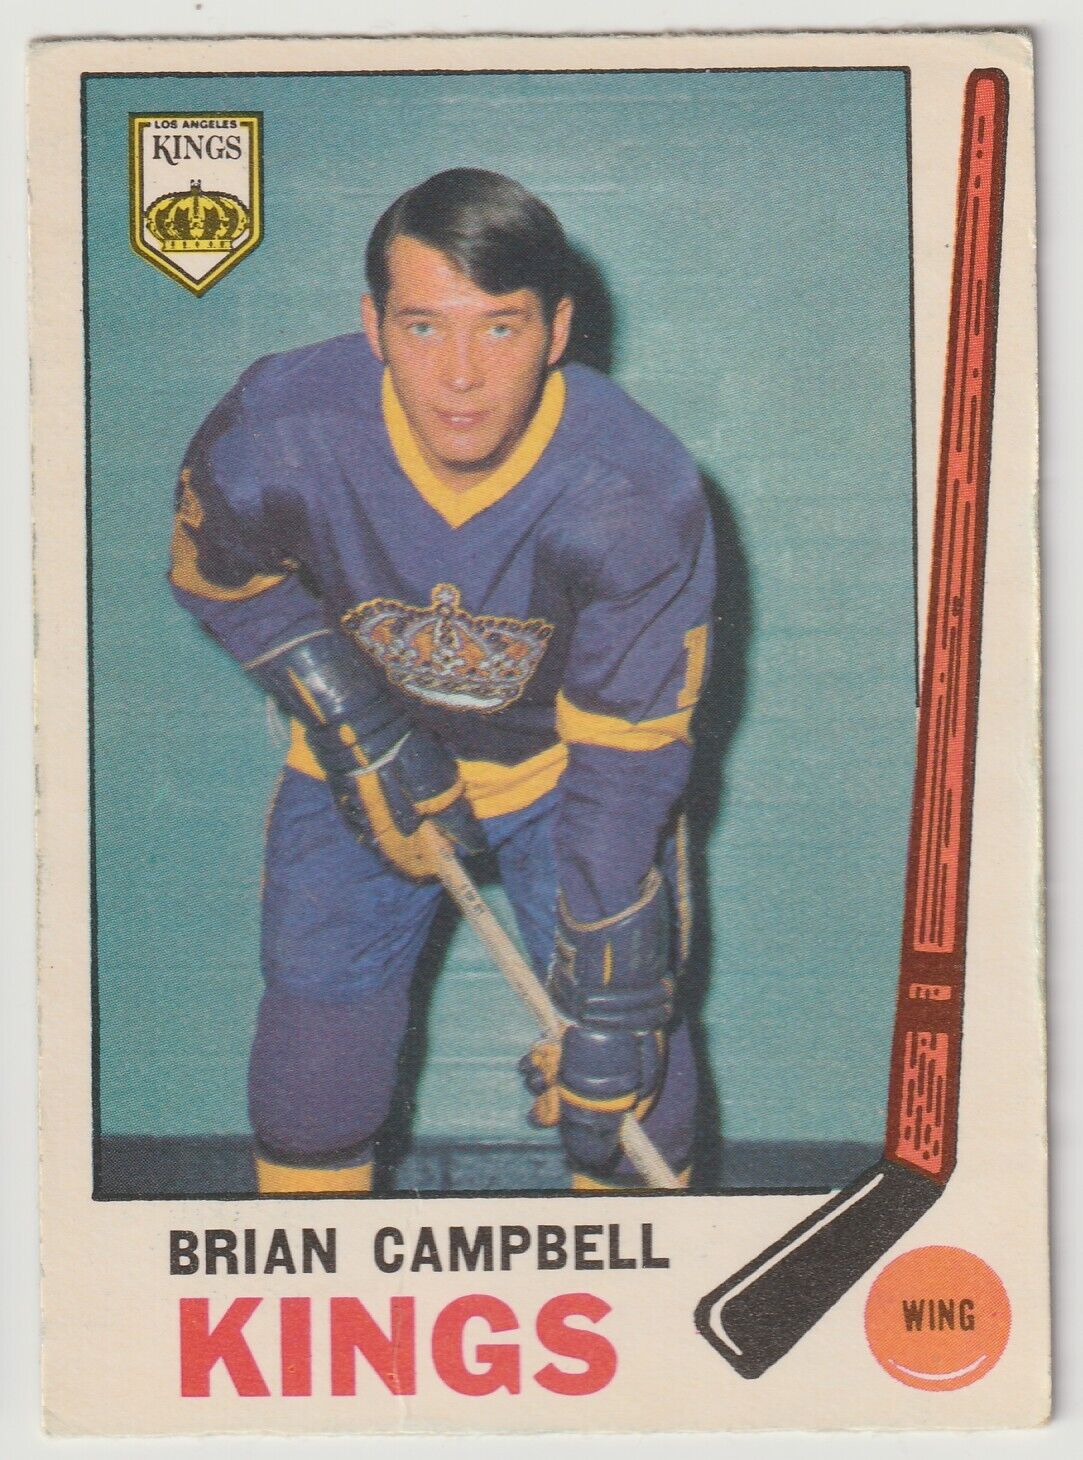 1969/70 OPC Brian Campbell Rookie Card #106 Los Angeles Kings. rookie card picture